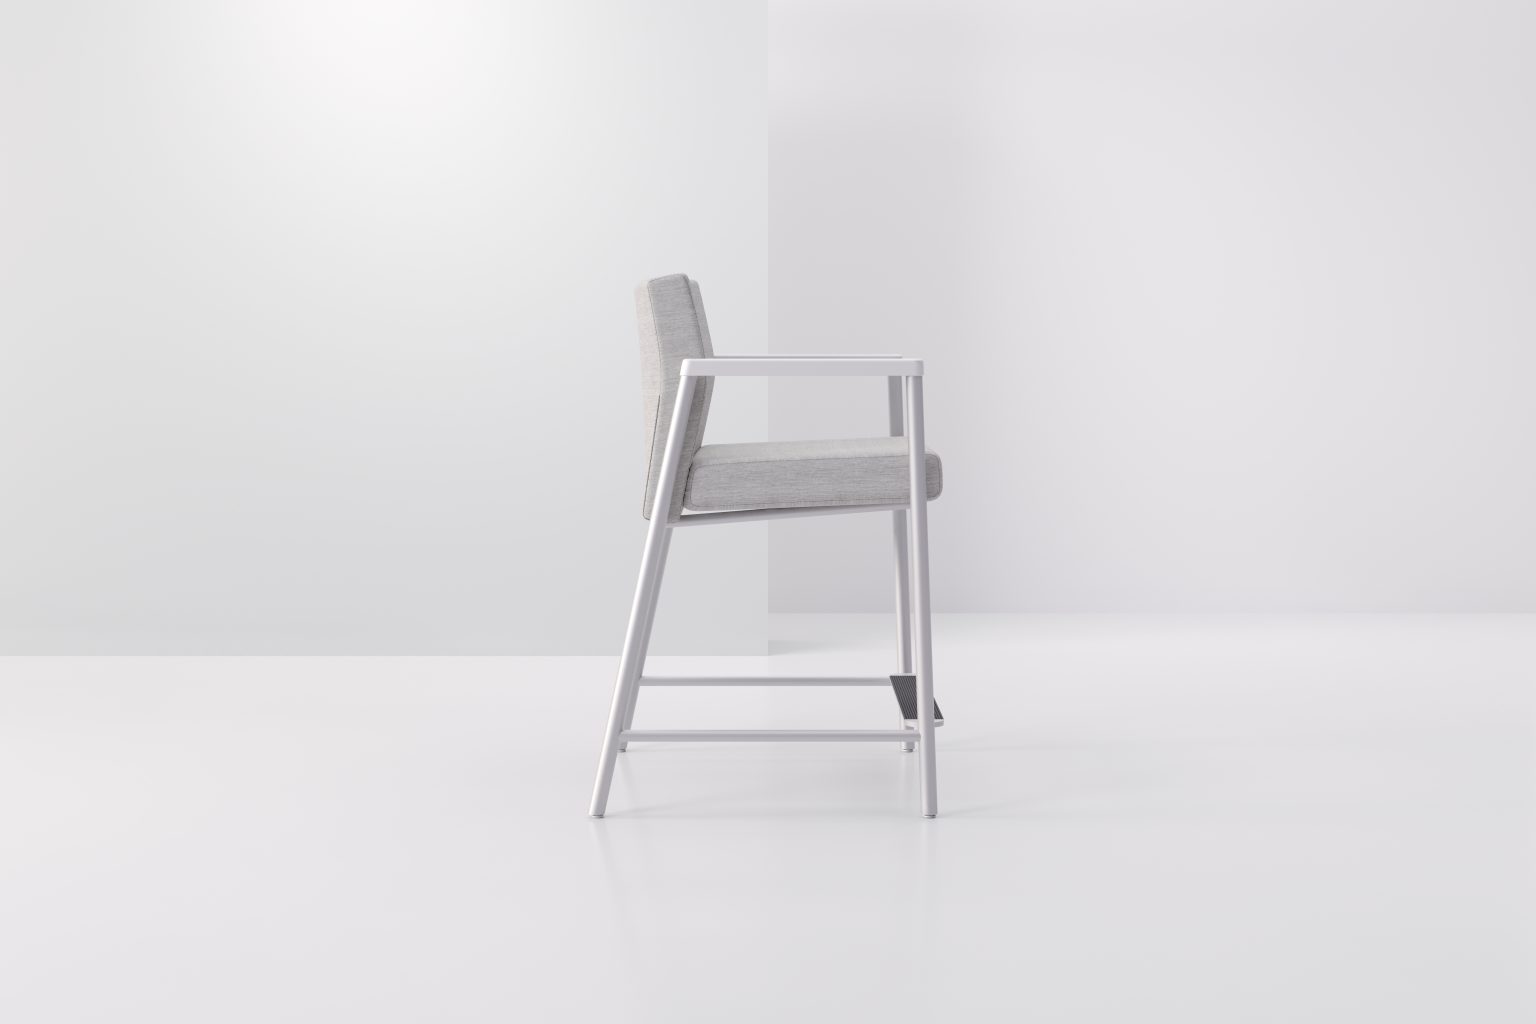 Altos Easy Access Chair Product Image 3